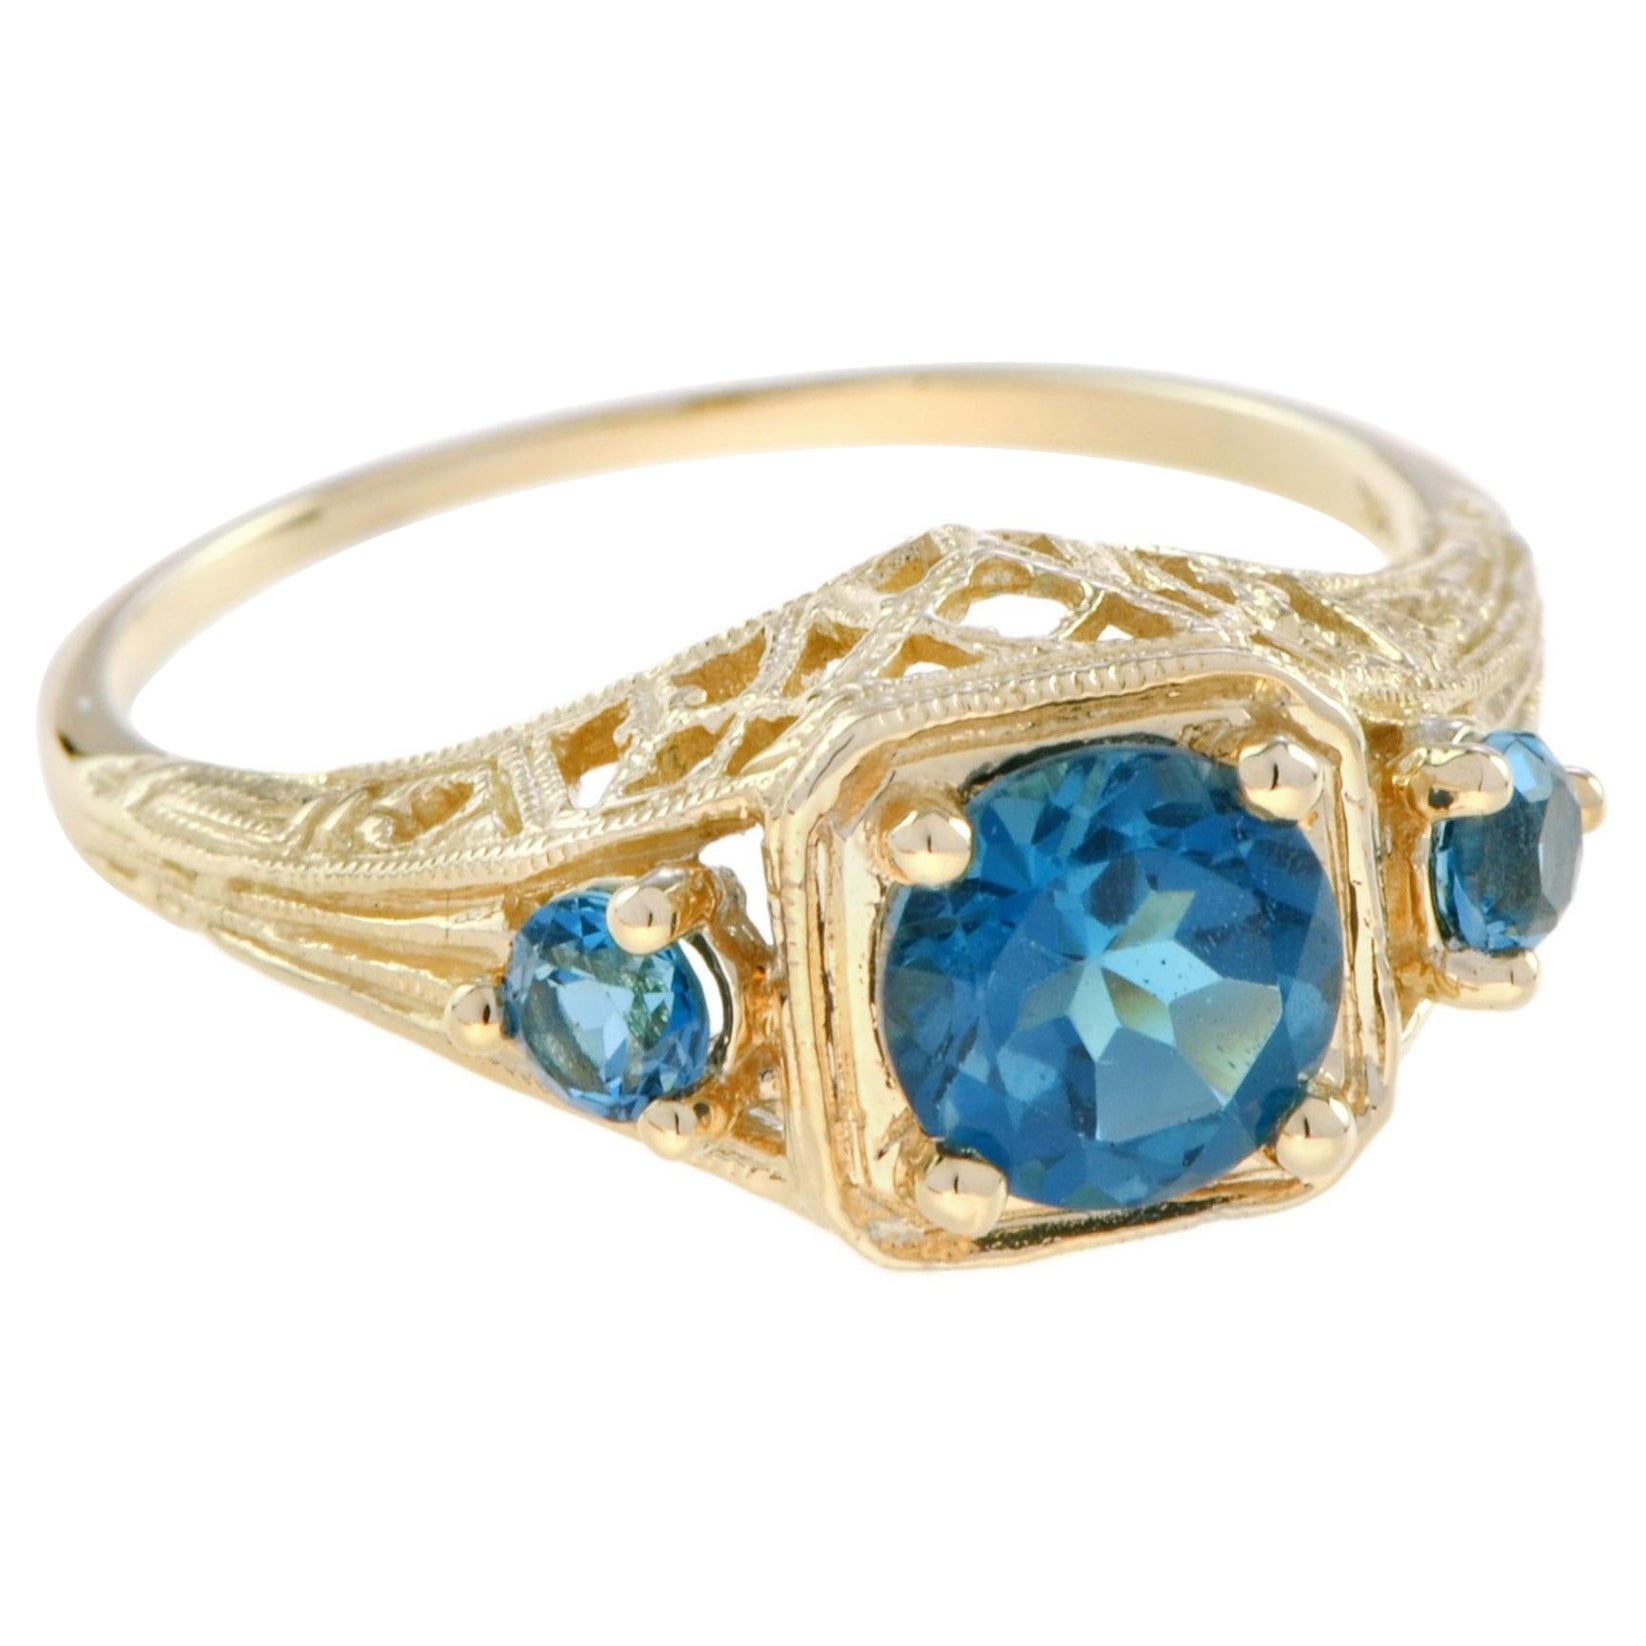 For Sale:  Natural London Blue Topaz Vintage Style Filigree Three Stone Ring in 9K Gold